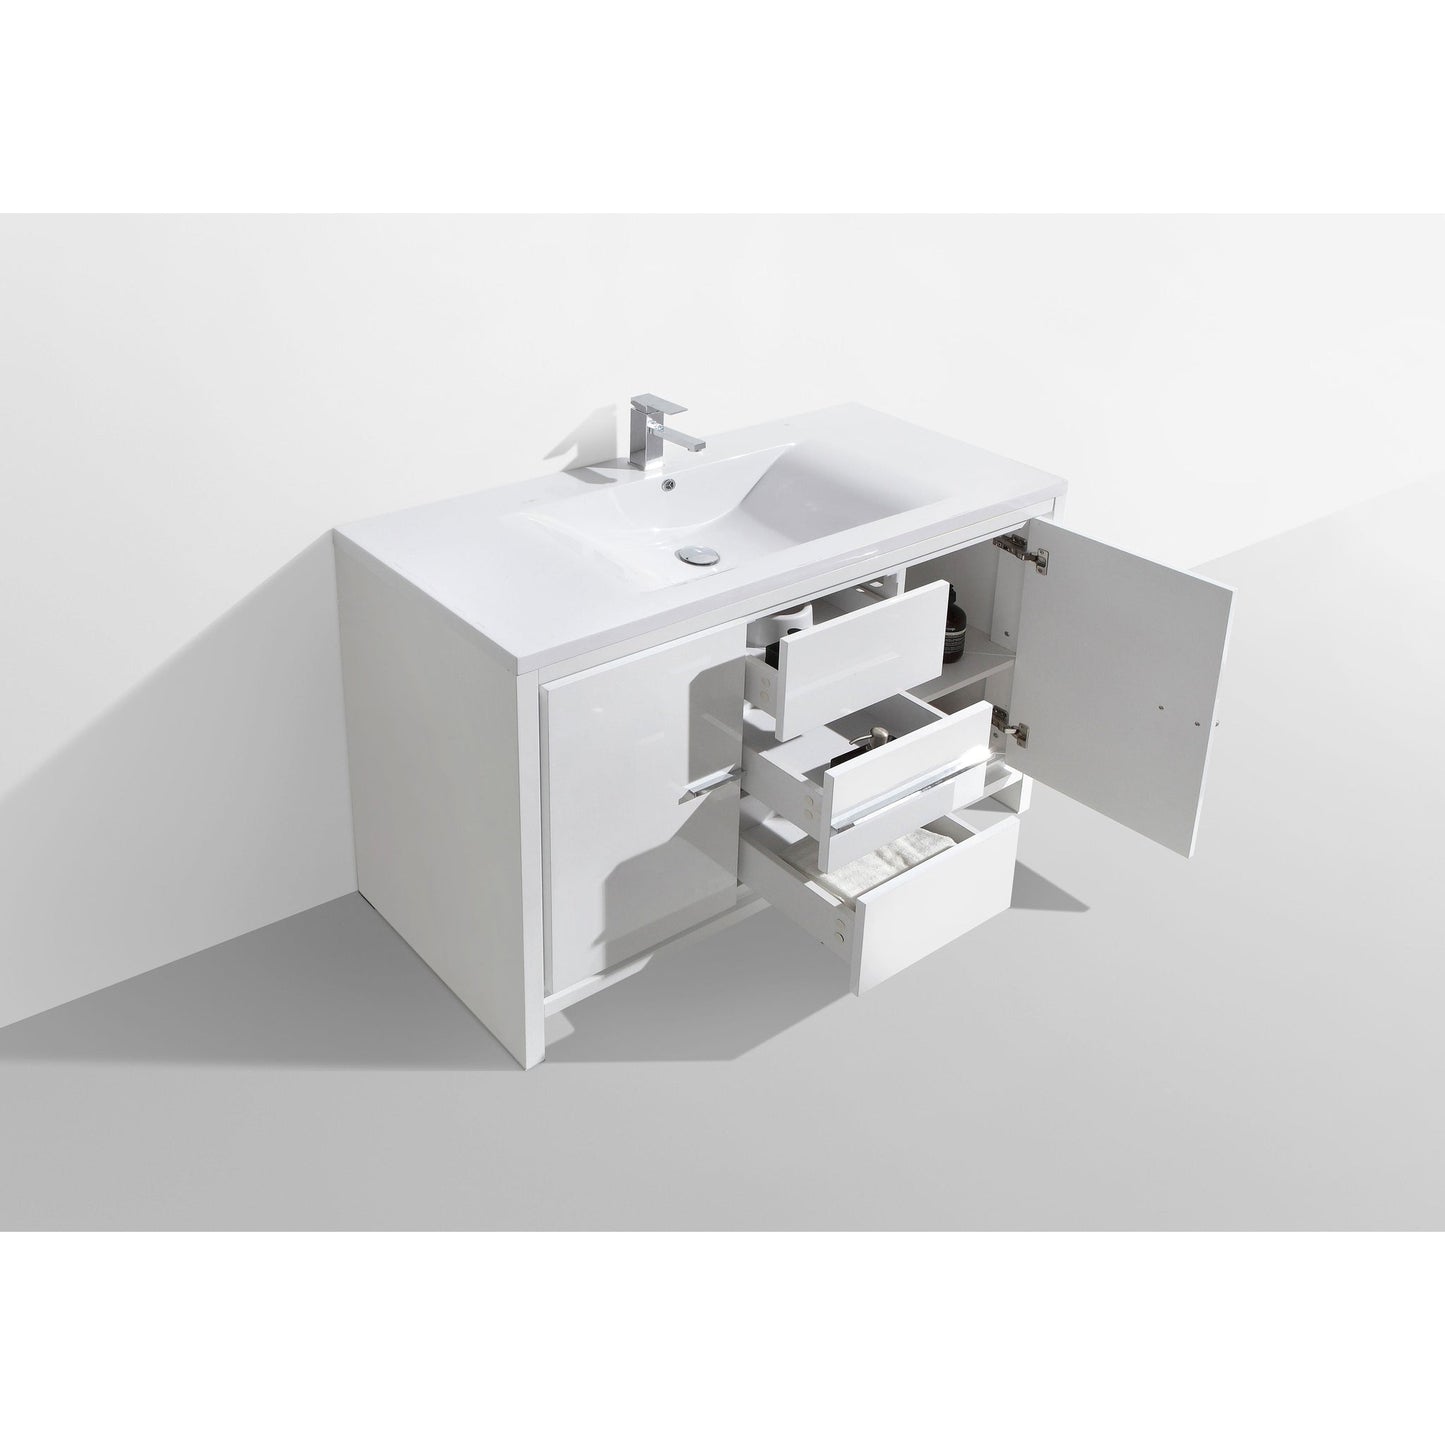 Moreno Bath Dolce 48" High Gloss White Freestanding Vanity With Single Reinforced White Acrylic Sink